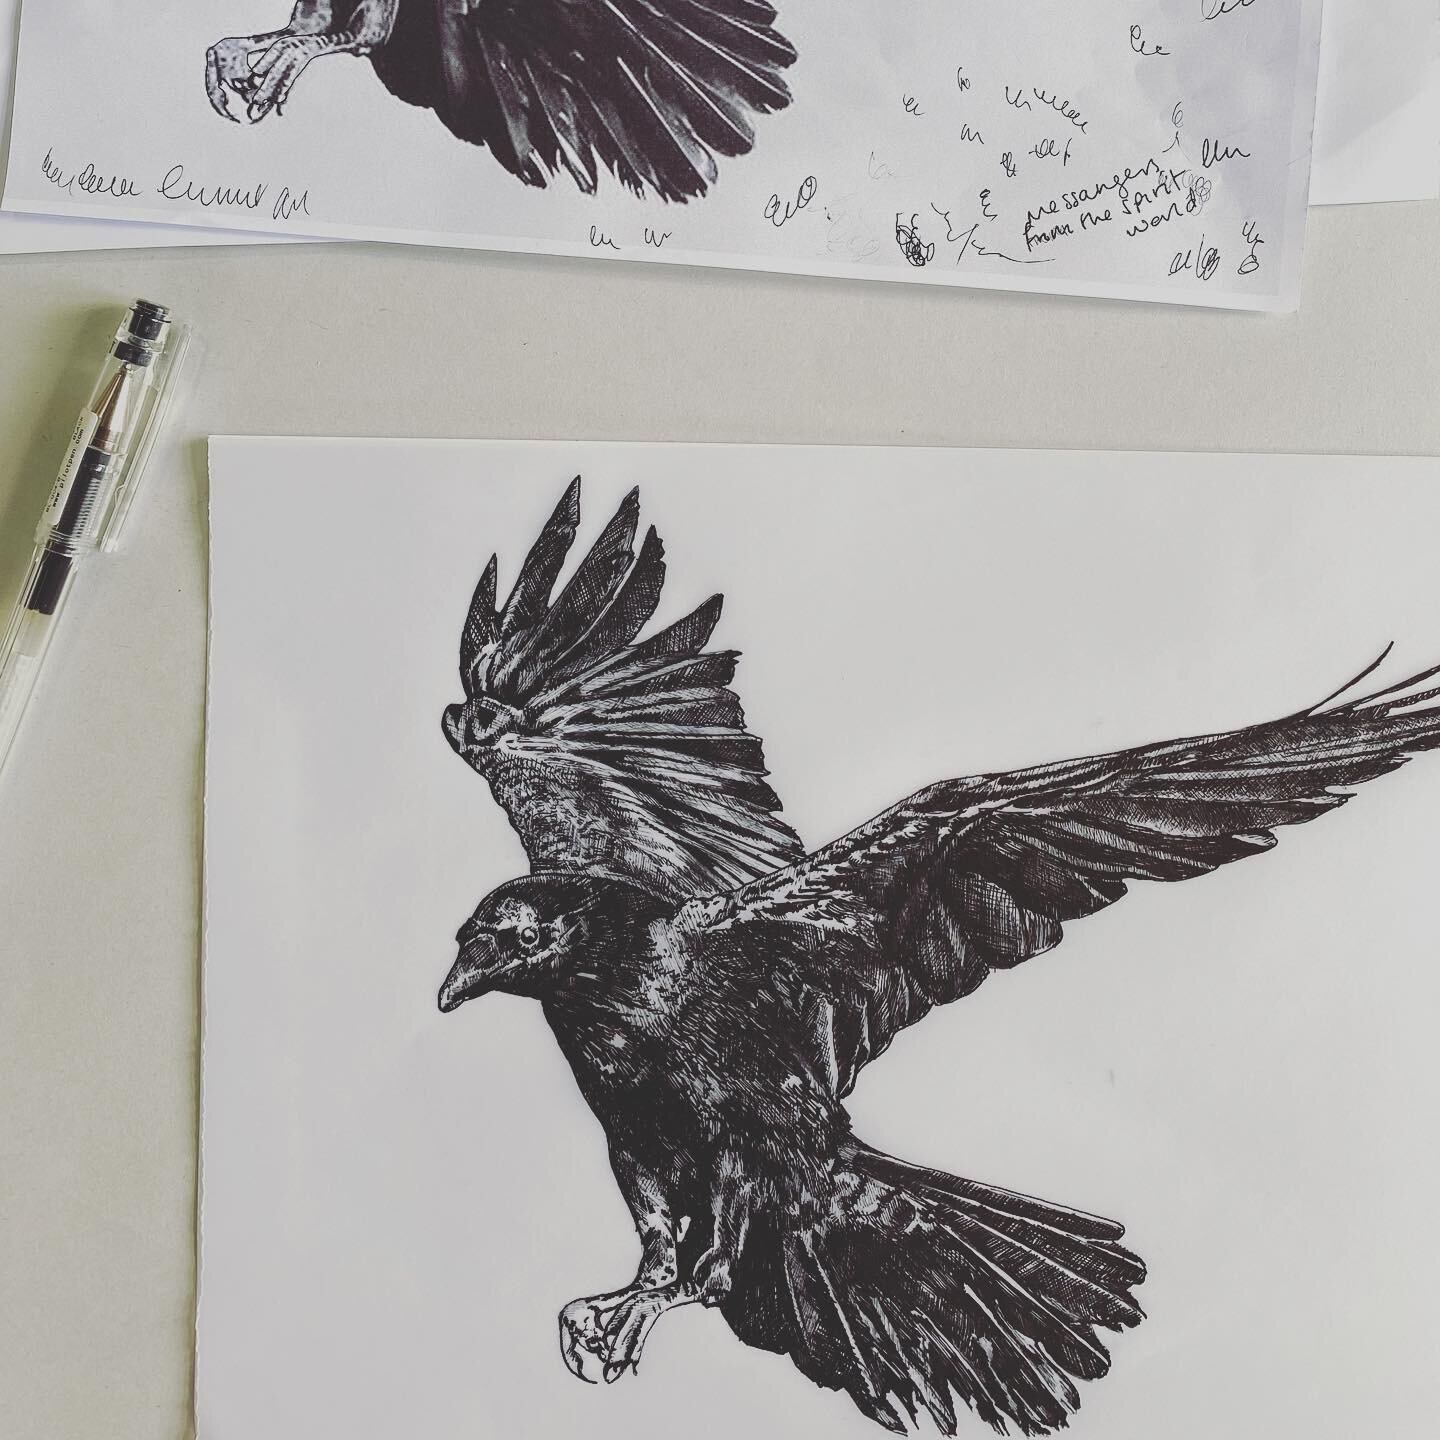 It was supposed to be as simplified drawing for a stencil, but I got carried away... the symbolism of a Raven is complex ranging from wisdom, healing, death and connecting the conscious and unconscious worlds. 

#drawing #stencil #printing #printmaki